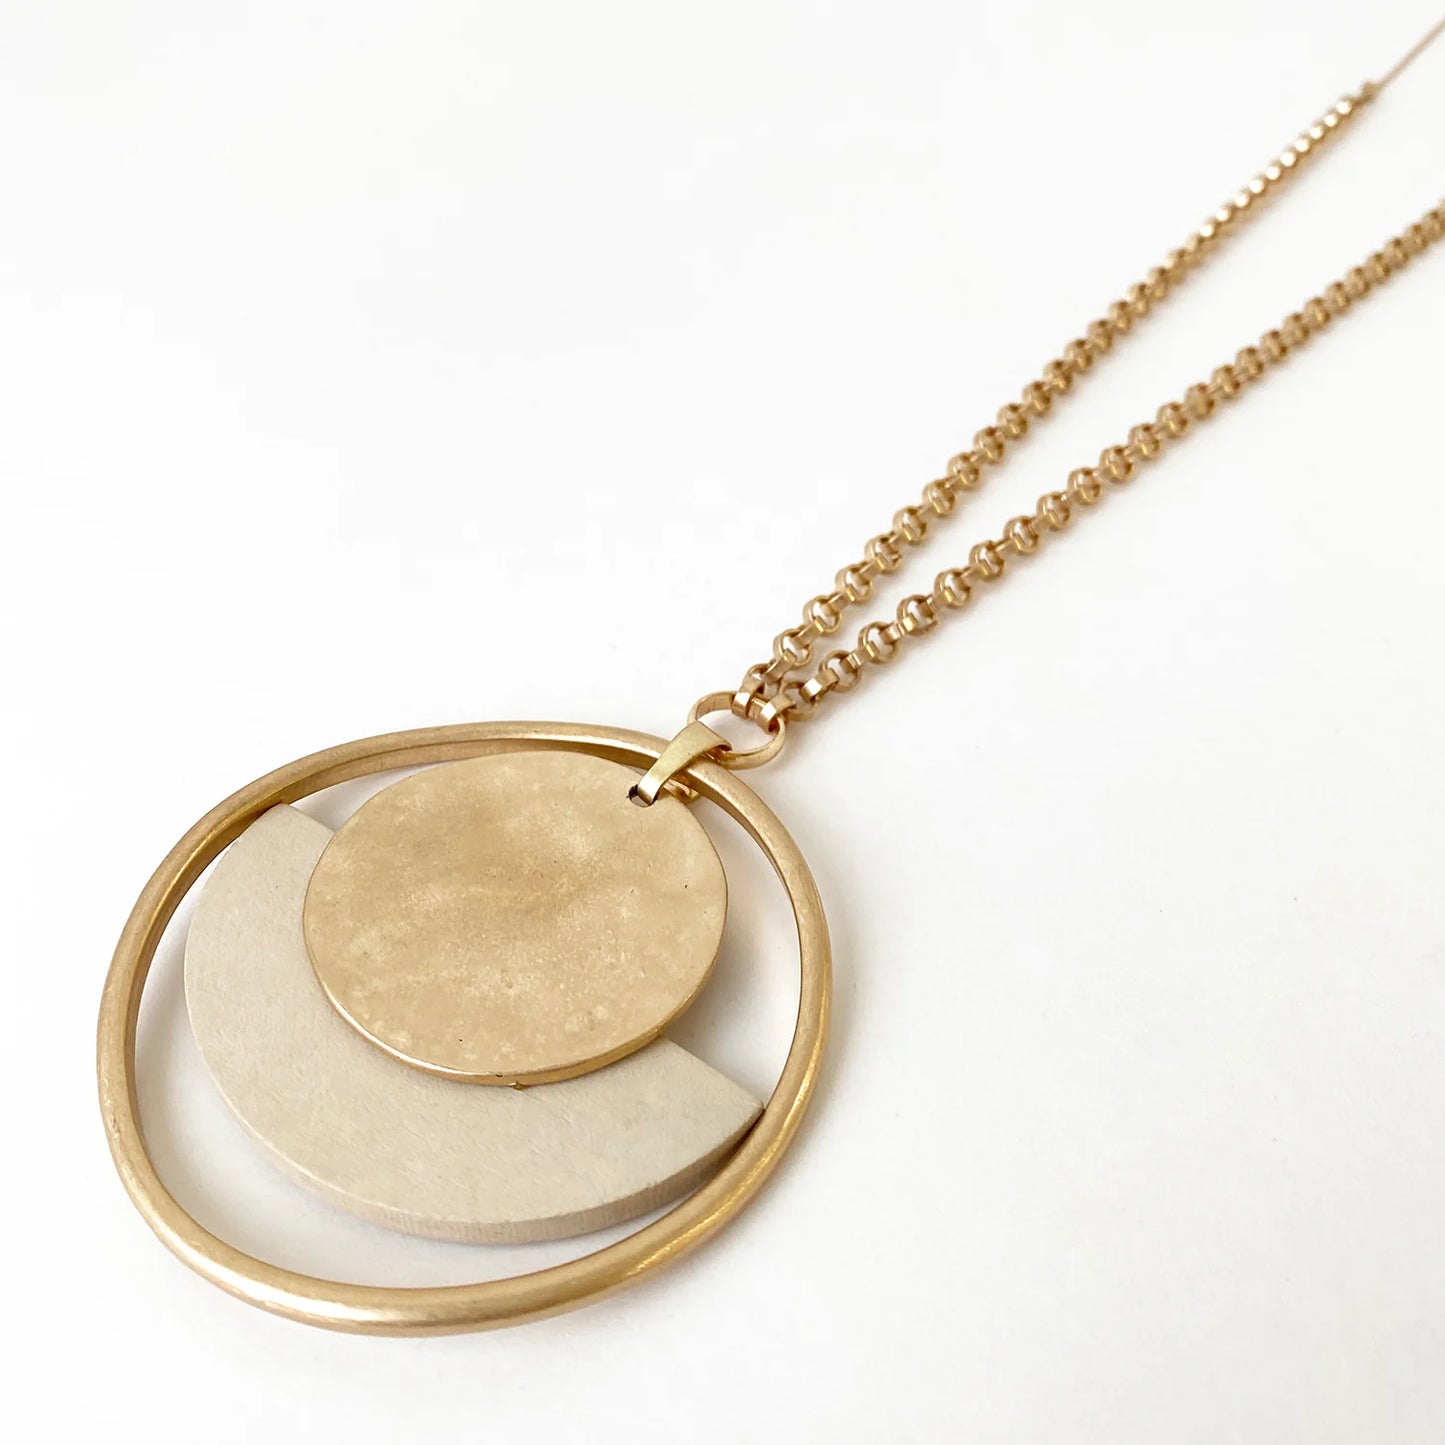 1575 - BEIGE & GOLD ROUND WAVED METAL & WOOD PENDANT ON LONG CHAIN